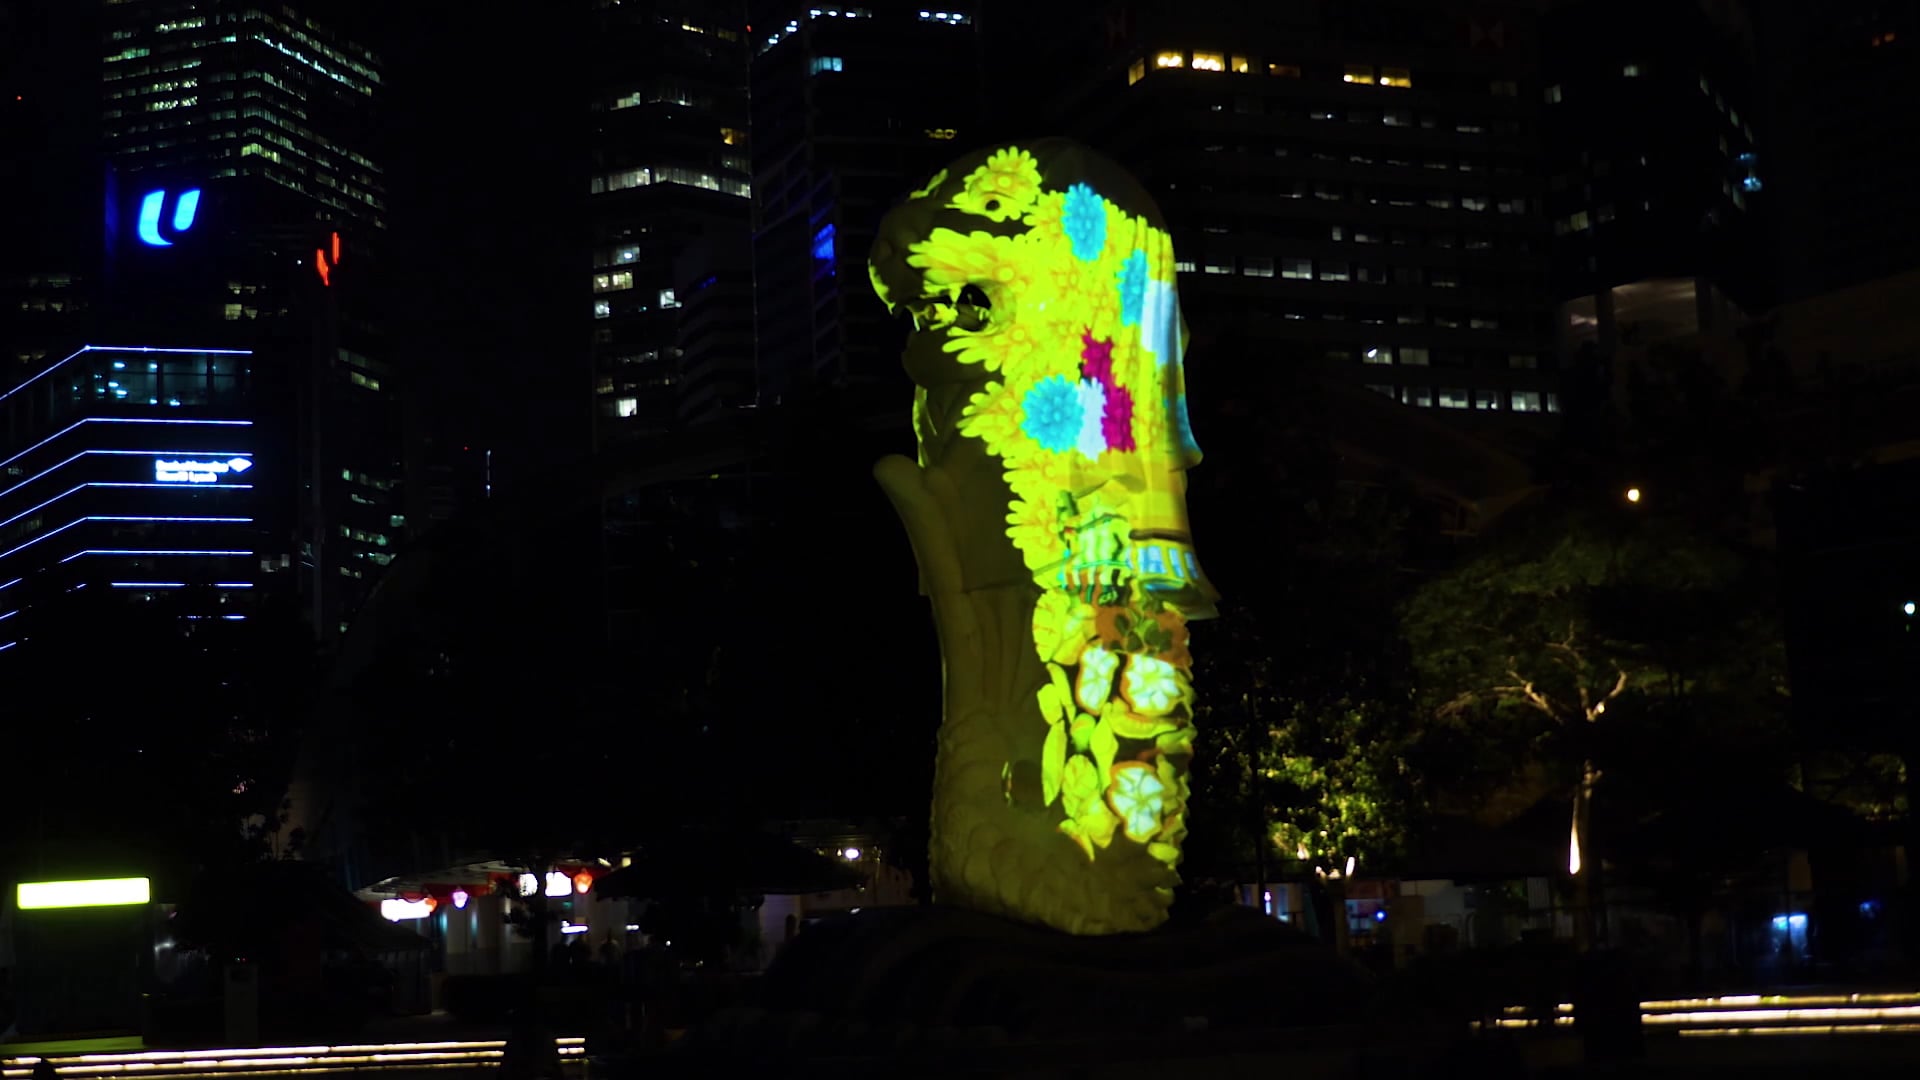 Mapping : THE CAT IN THE GARDEN - Merlion, Marina Bay, Singapour - janvier > février 2019